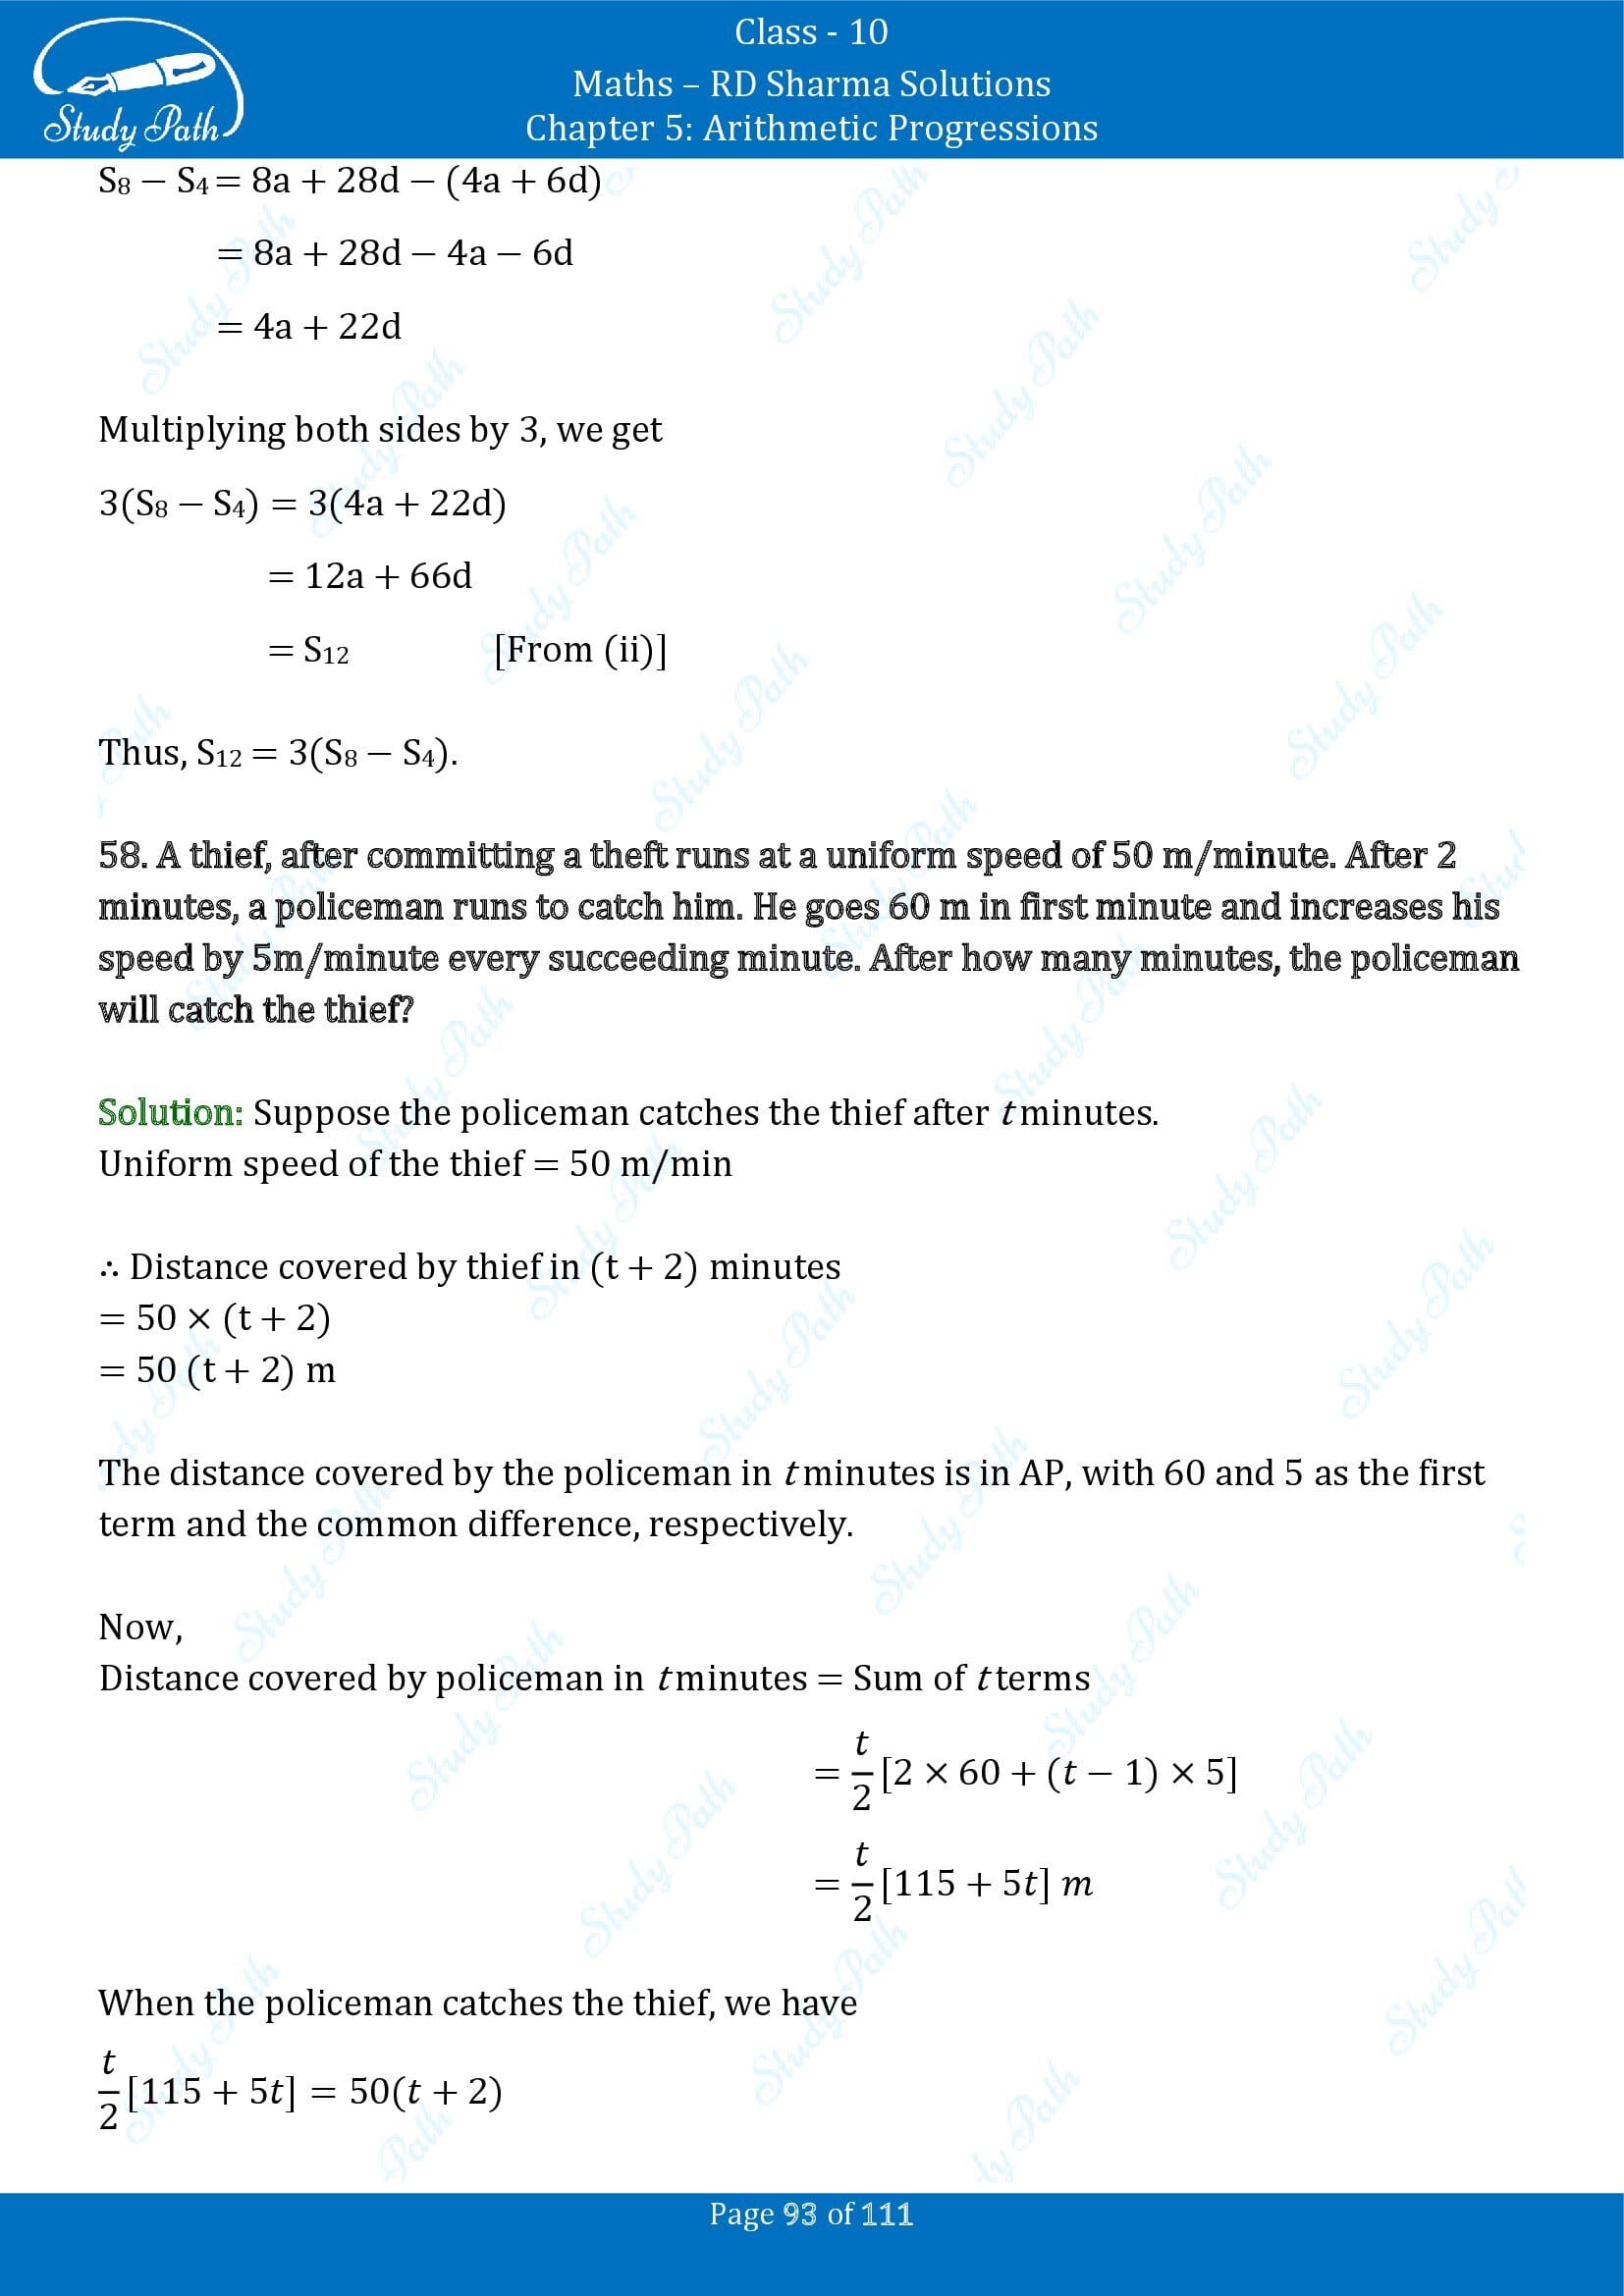 RD Sharma Solutions Class 10 Chapter 5 Arithmetic Progressions Exercise 5.6 00093